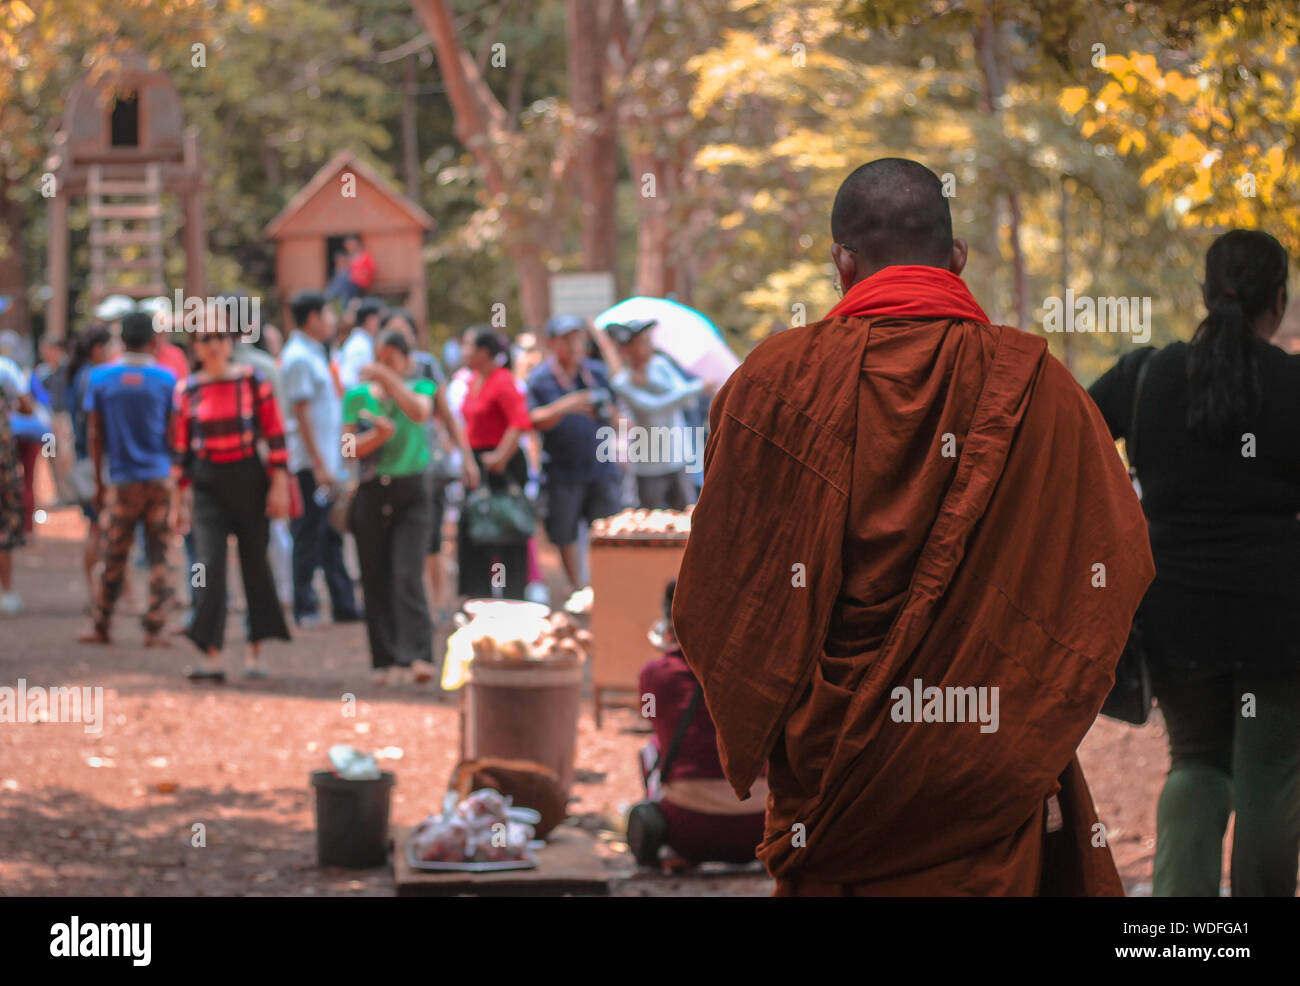 Rear View Of Monk Walking At Religious Place Stock Photo